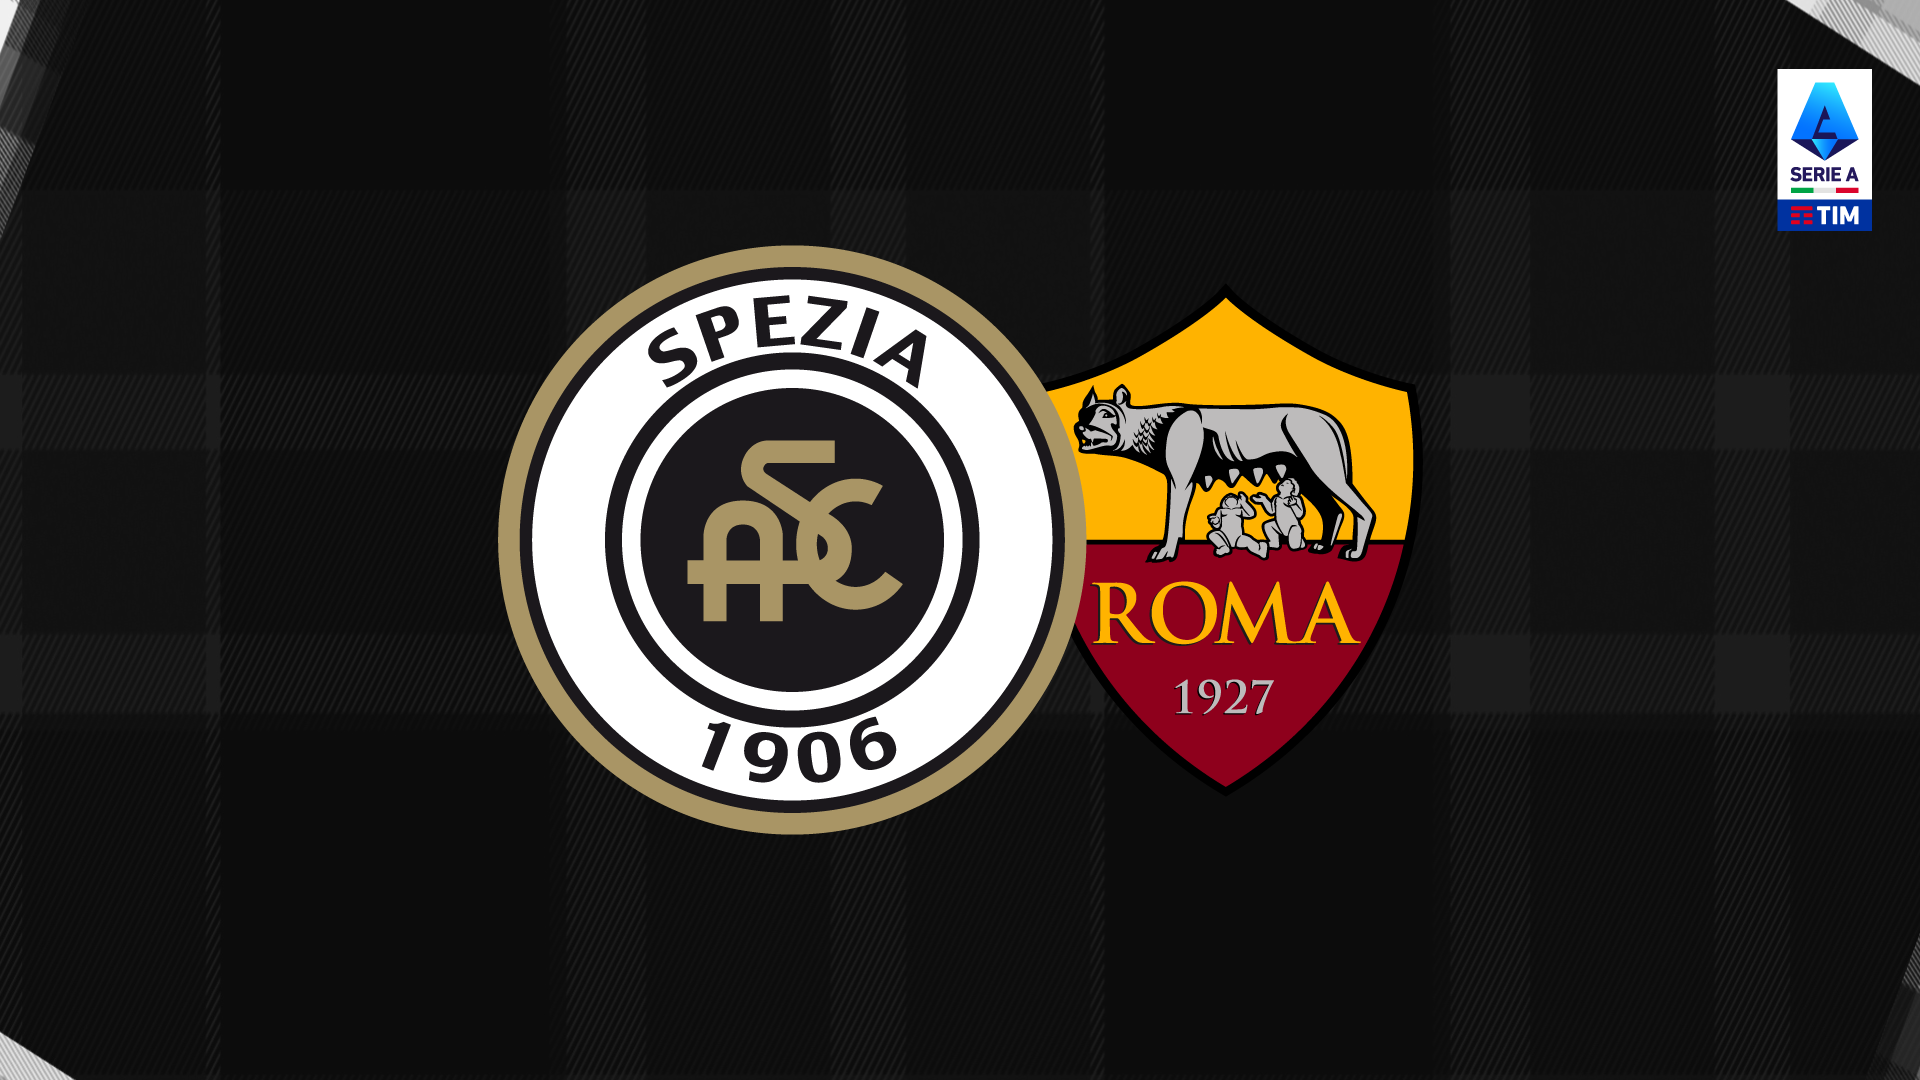 Spezia-Rome: Tuesday, Jan. 10 to Thursday, Jan. 12 active presale for Eagle Card holders